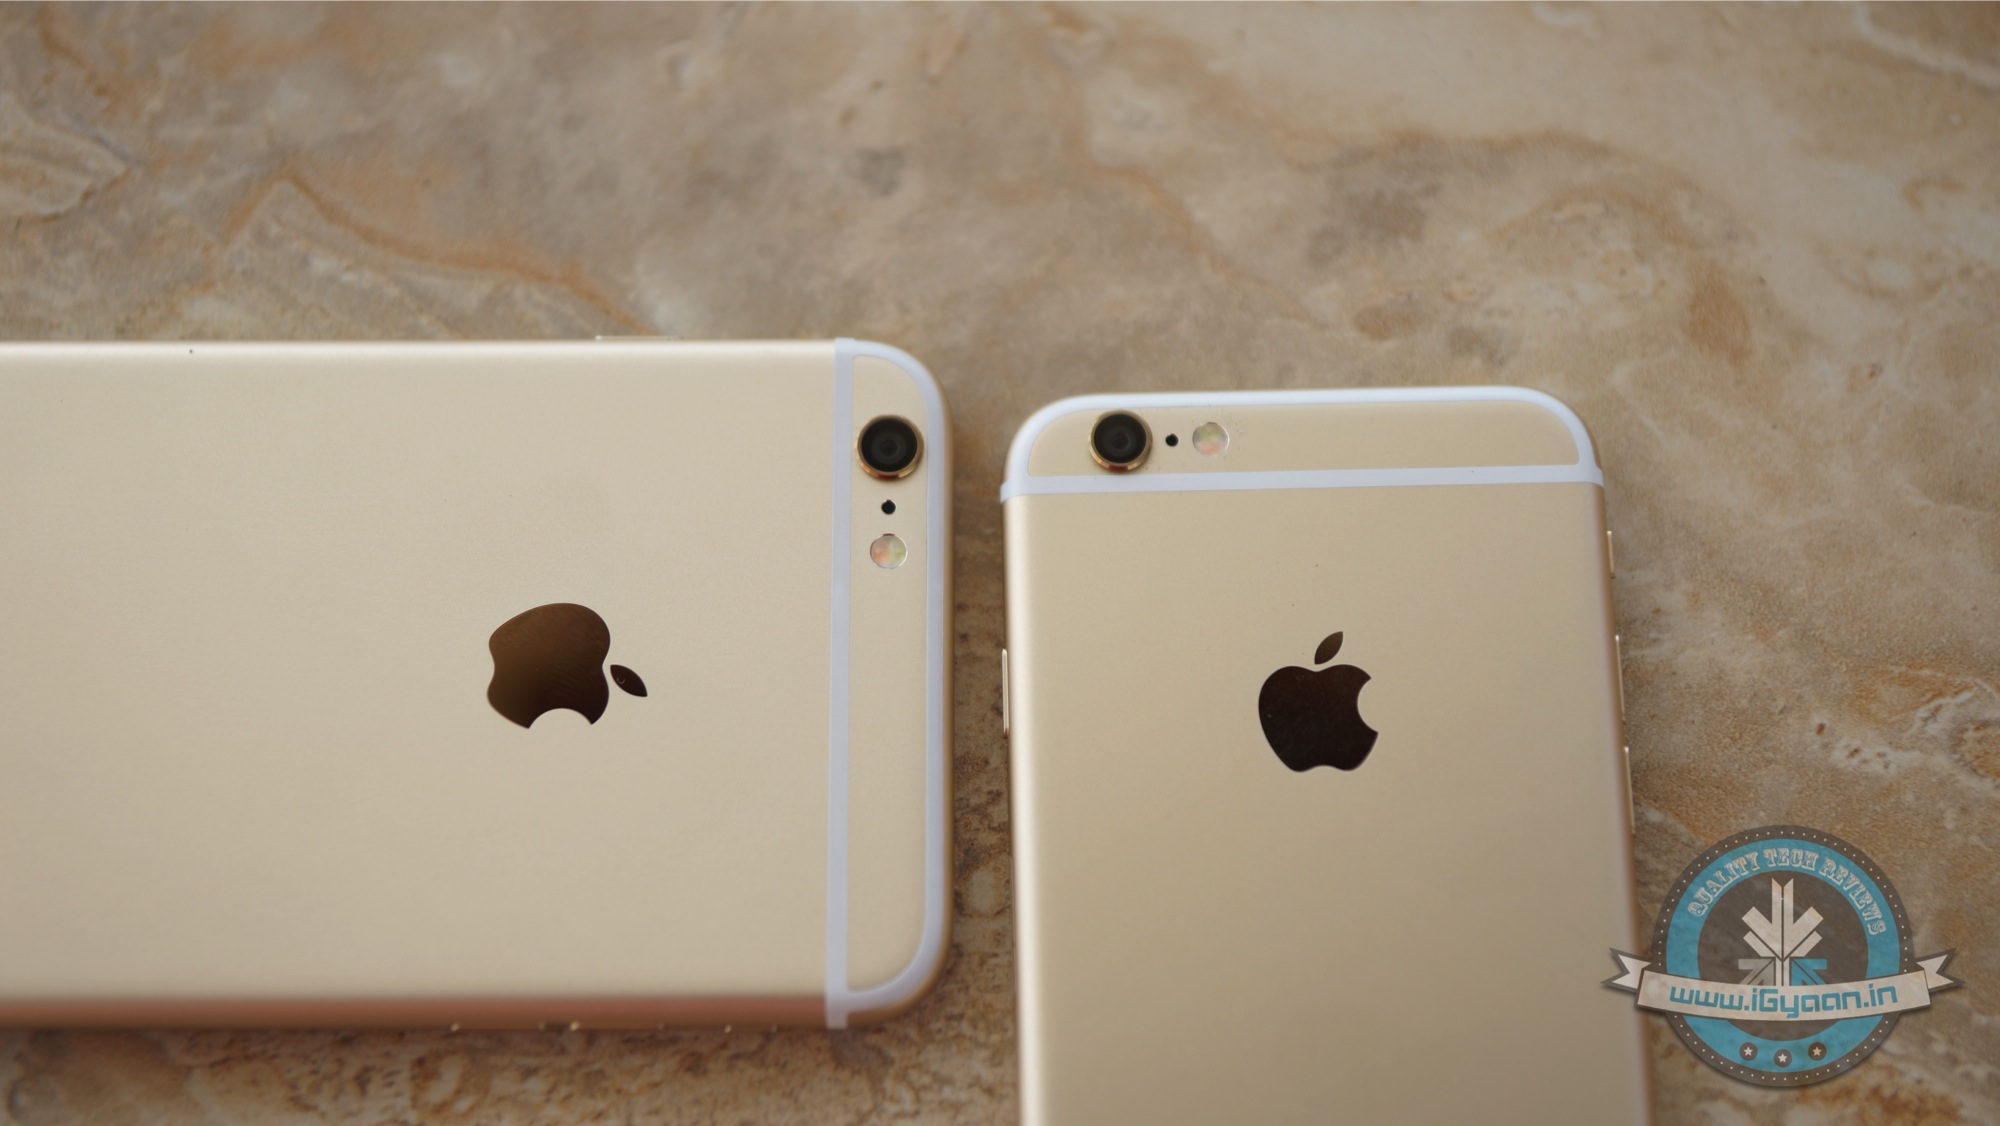 Iphone 6 Plus Review Bigger For The Bends